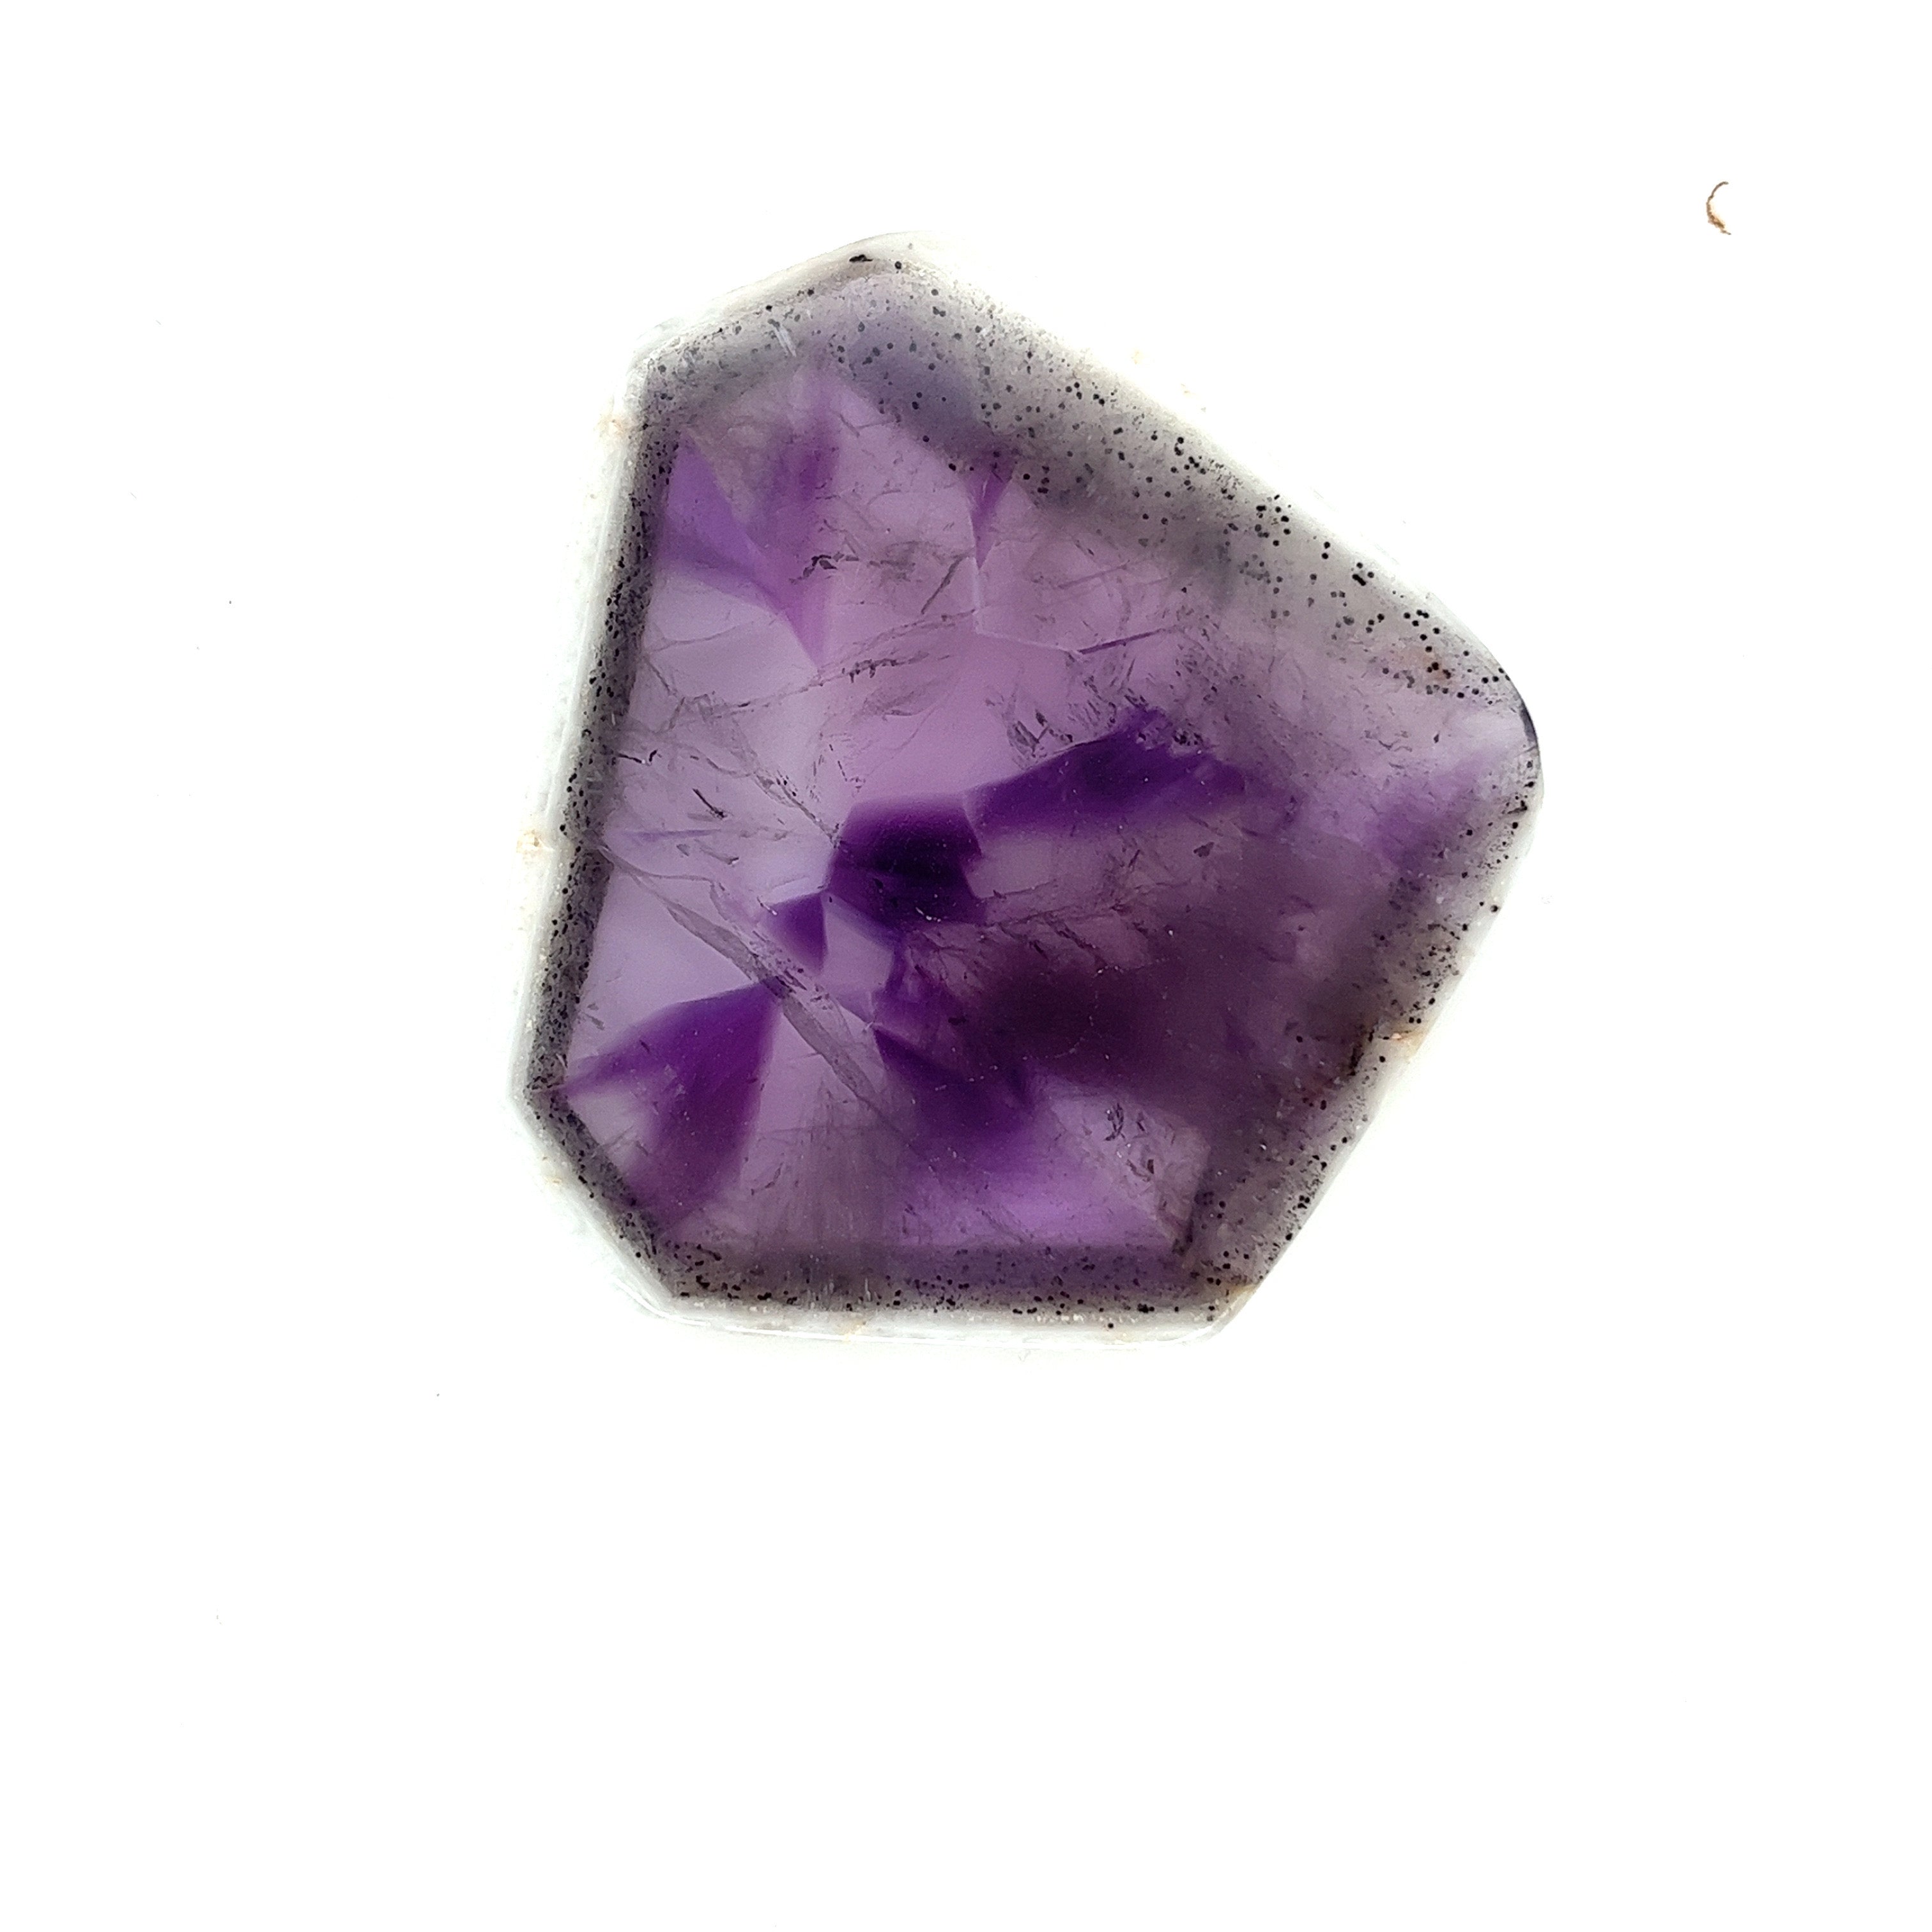 Trapiche Amethyst; Natural Untreated India Amethyst Slice, 27grams - Mark Oliver Gems